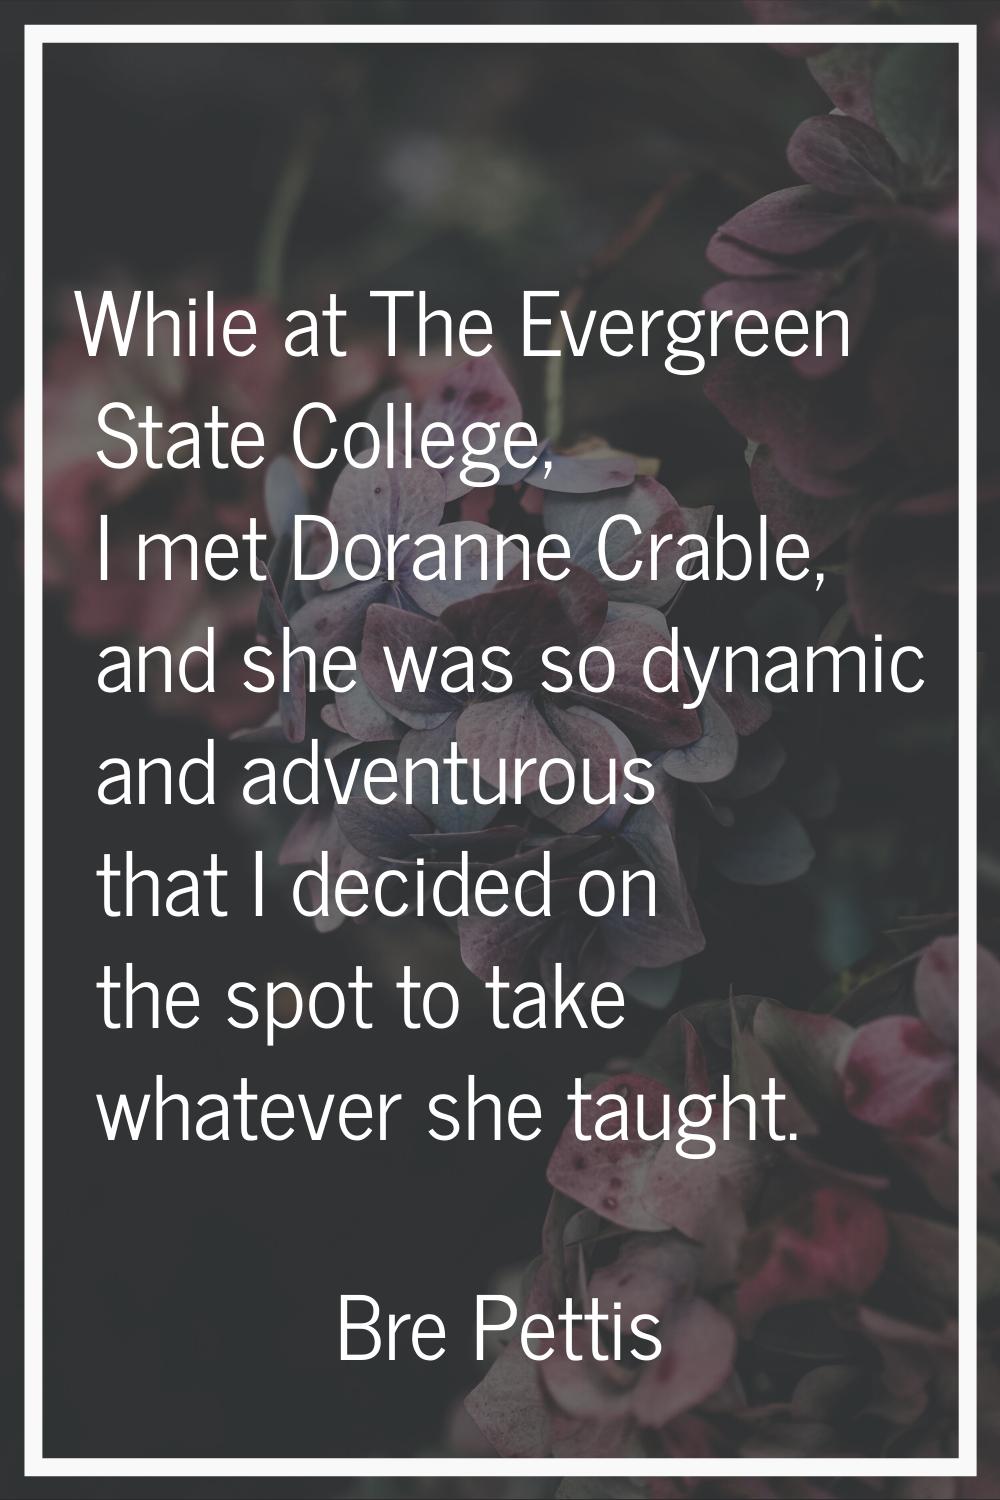 While at The Evergreen State College, I met Doranne Crable, and she was so dynamic and adventurous 